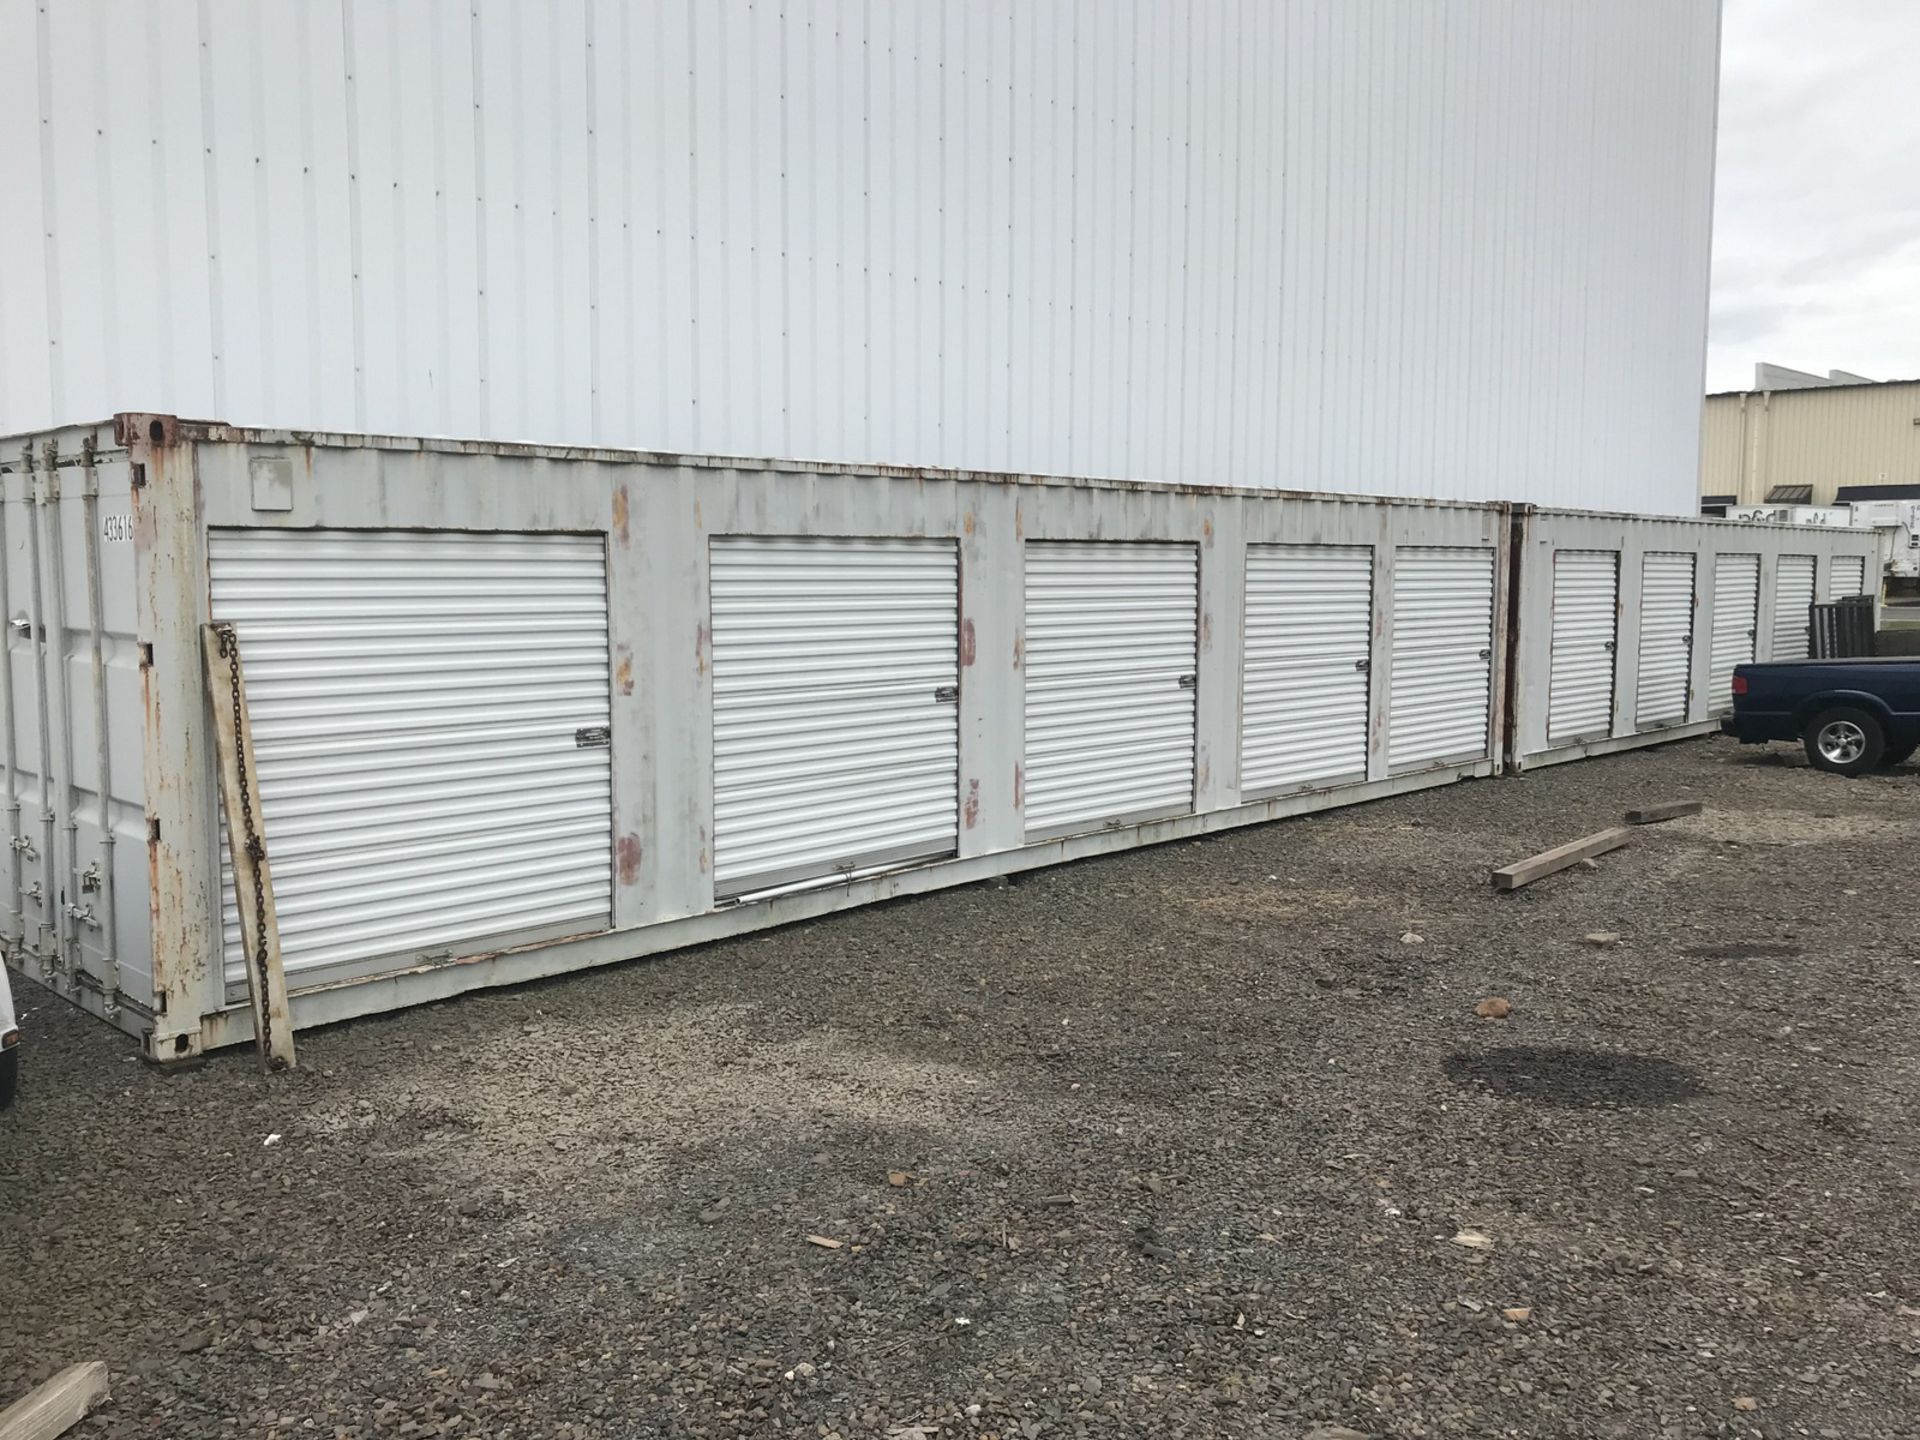 (2) Yangming Marine Transport Corp. 40' x 8' Shipping Containers converted into Storage